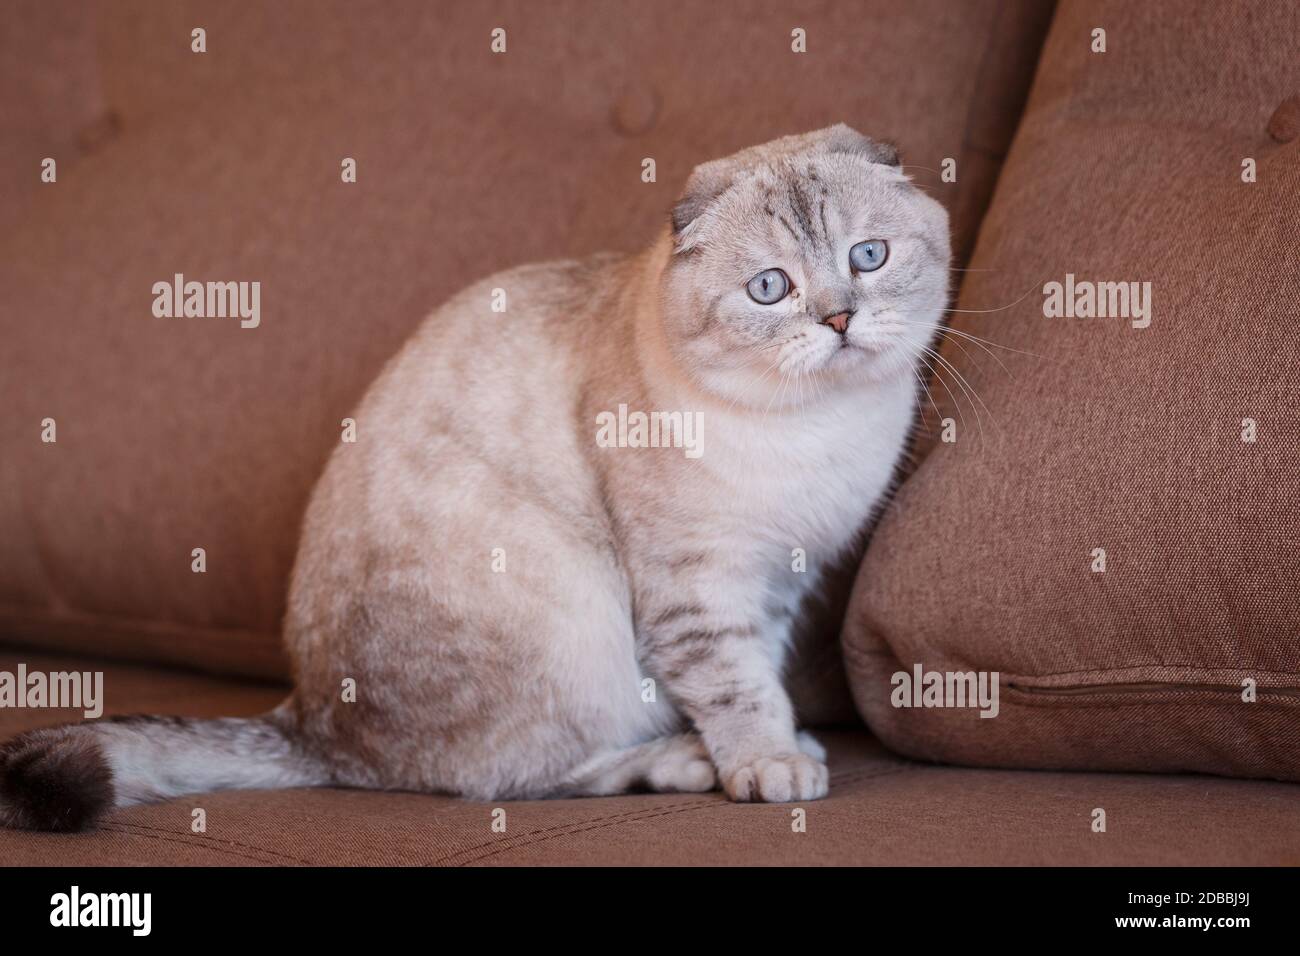 Very beautiful purebred gray cat. Photo causes a smile and positive emotions. Suitable for advertising a pet store or cat food. Scottish breed. Stock Photo